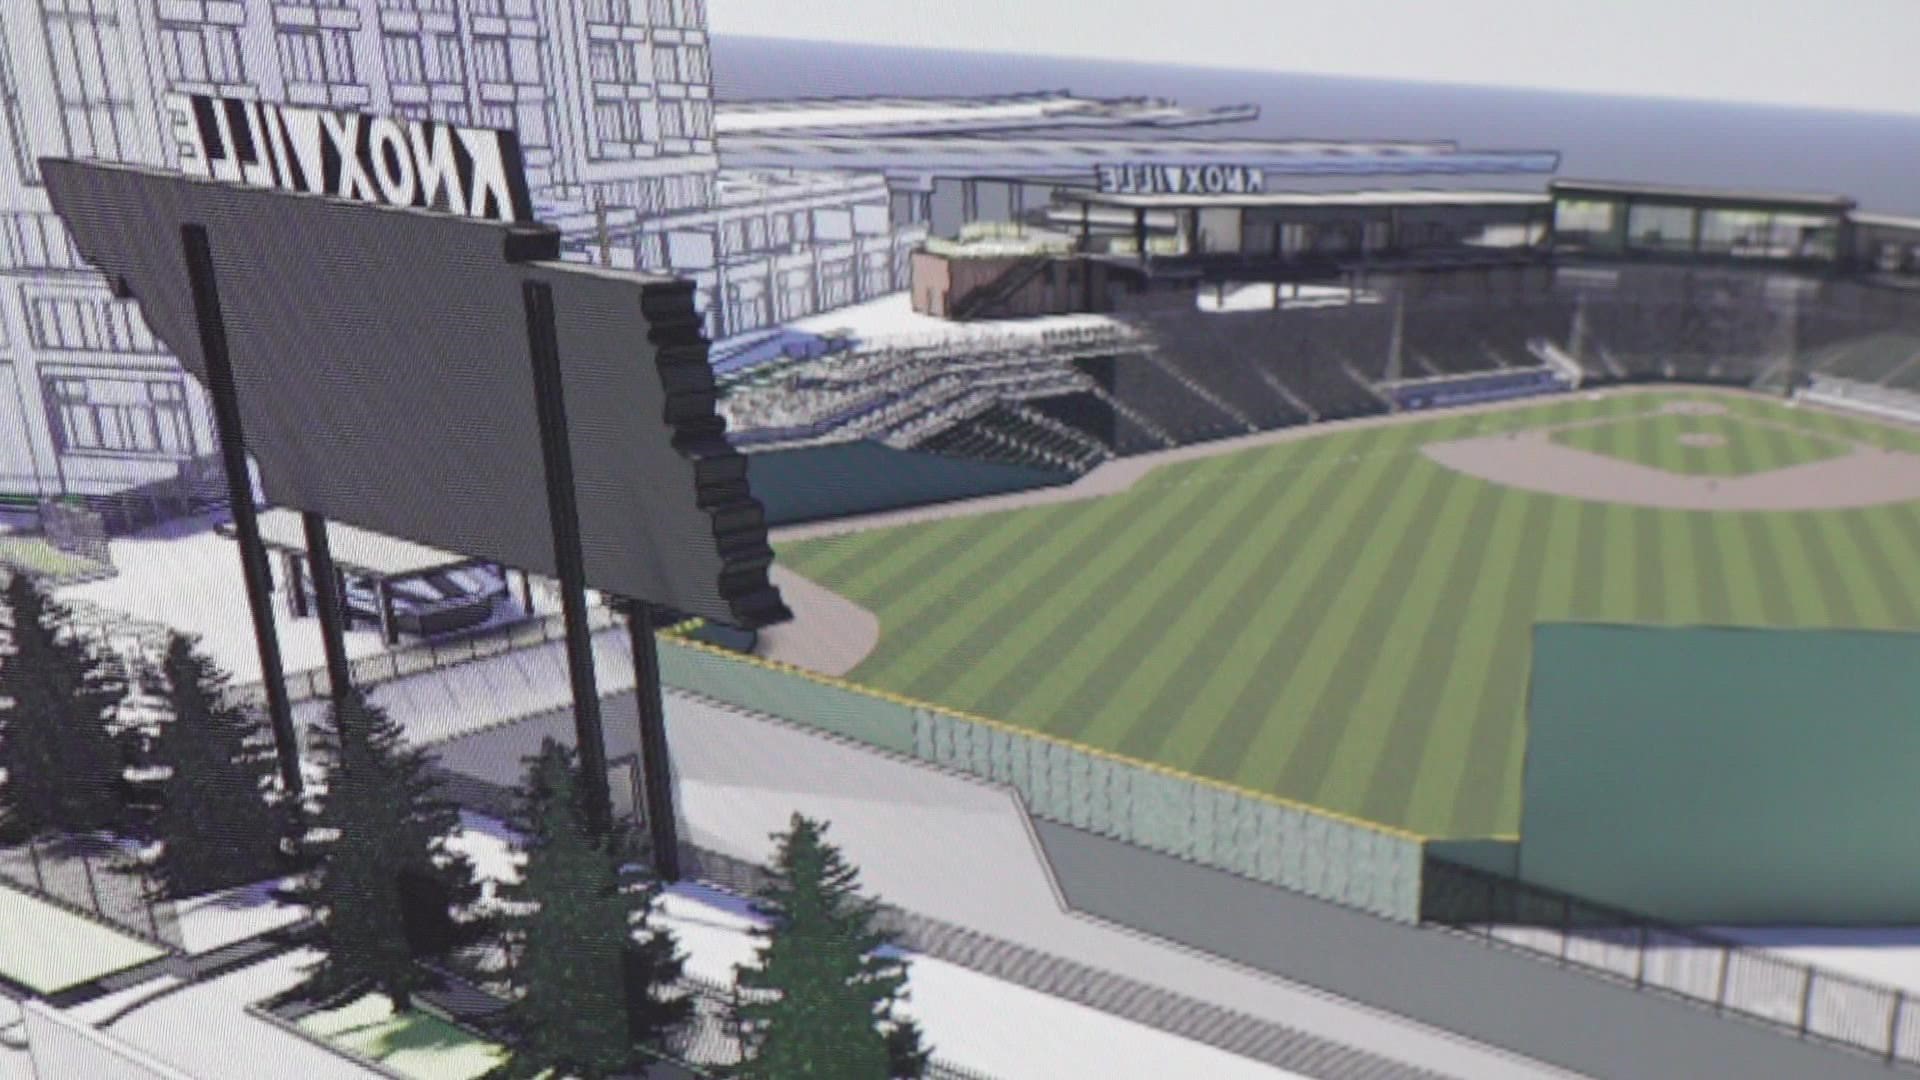 The stadium has been in development for several months.